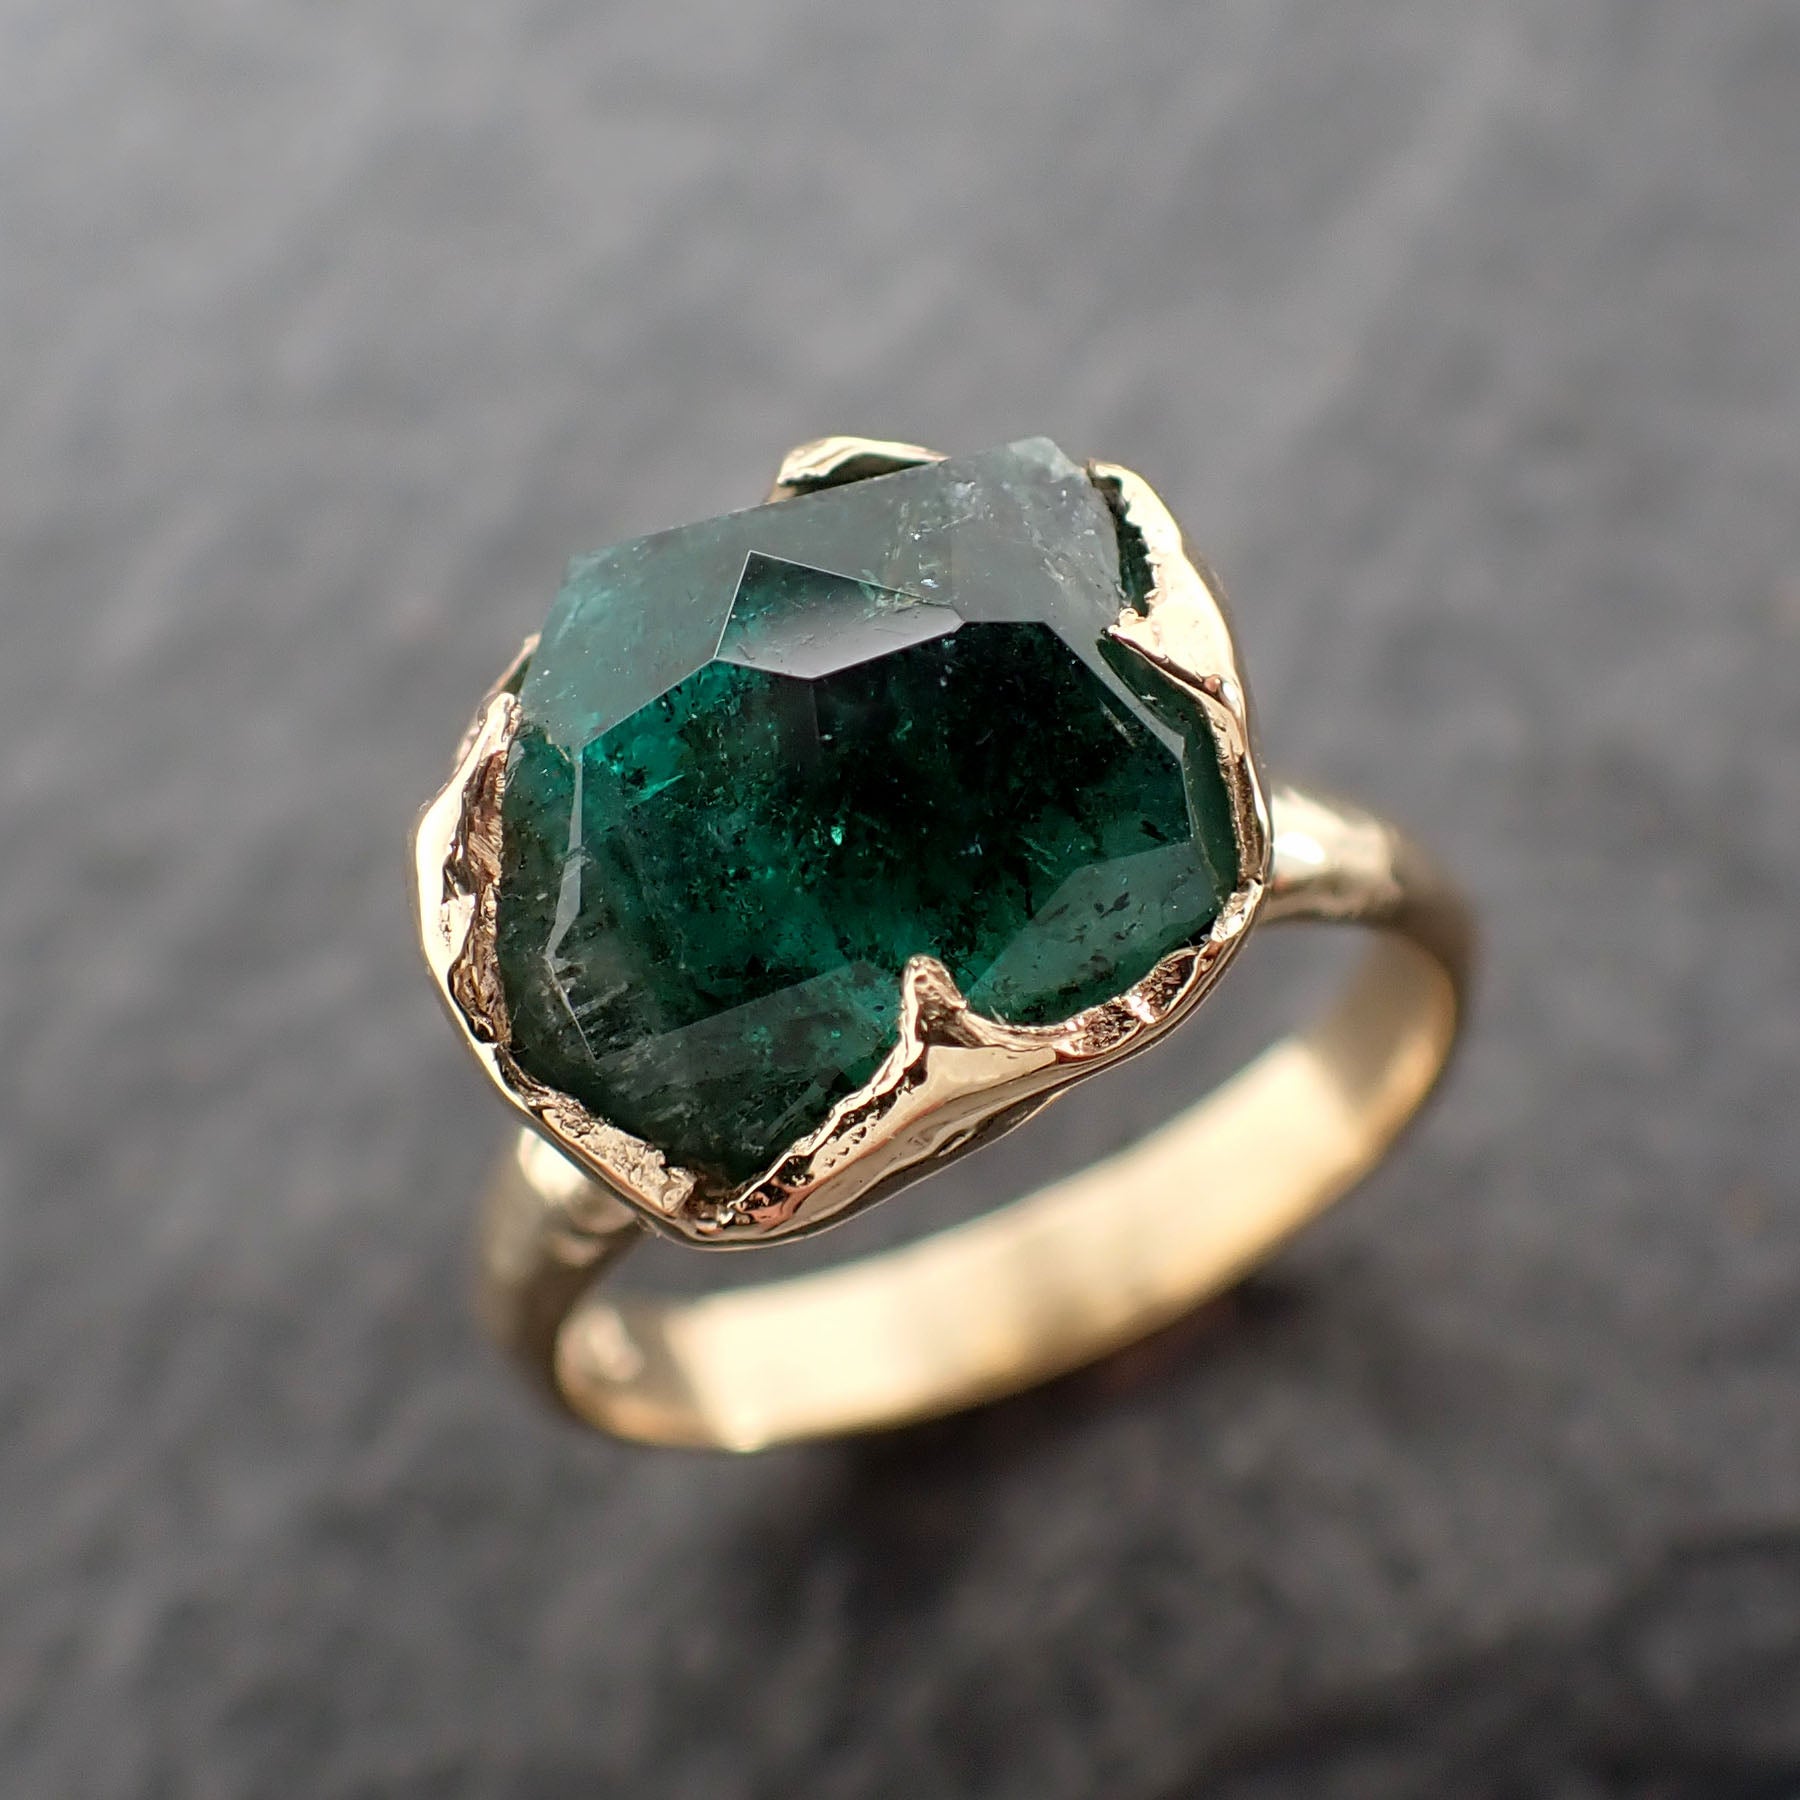 Partially Faceted Emerald Solitaire yellow 18k Gold Ring Birthstone One Of a Kind Gemstone Cocktail Ring Recycled 2528